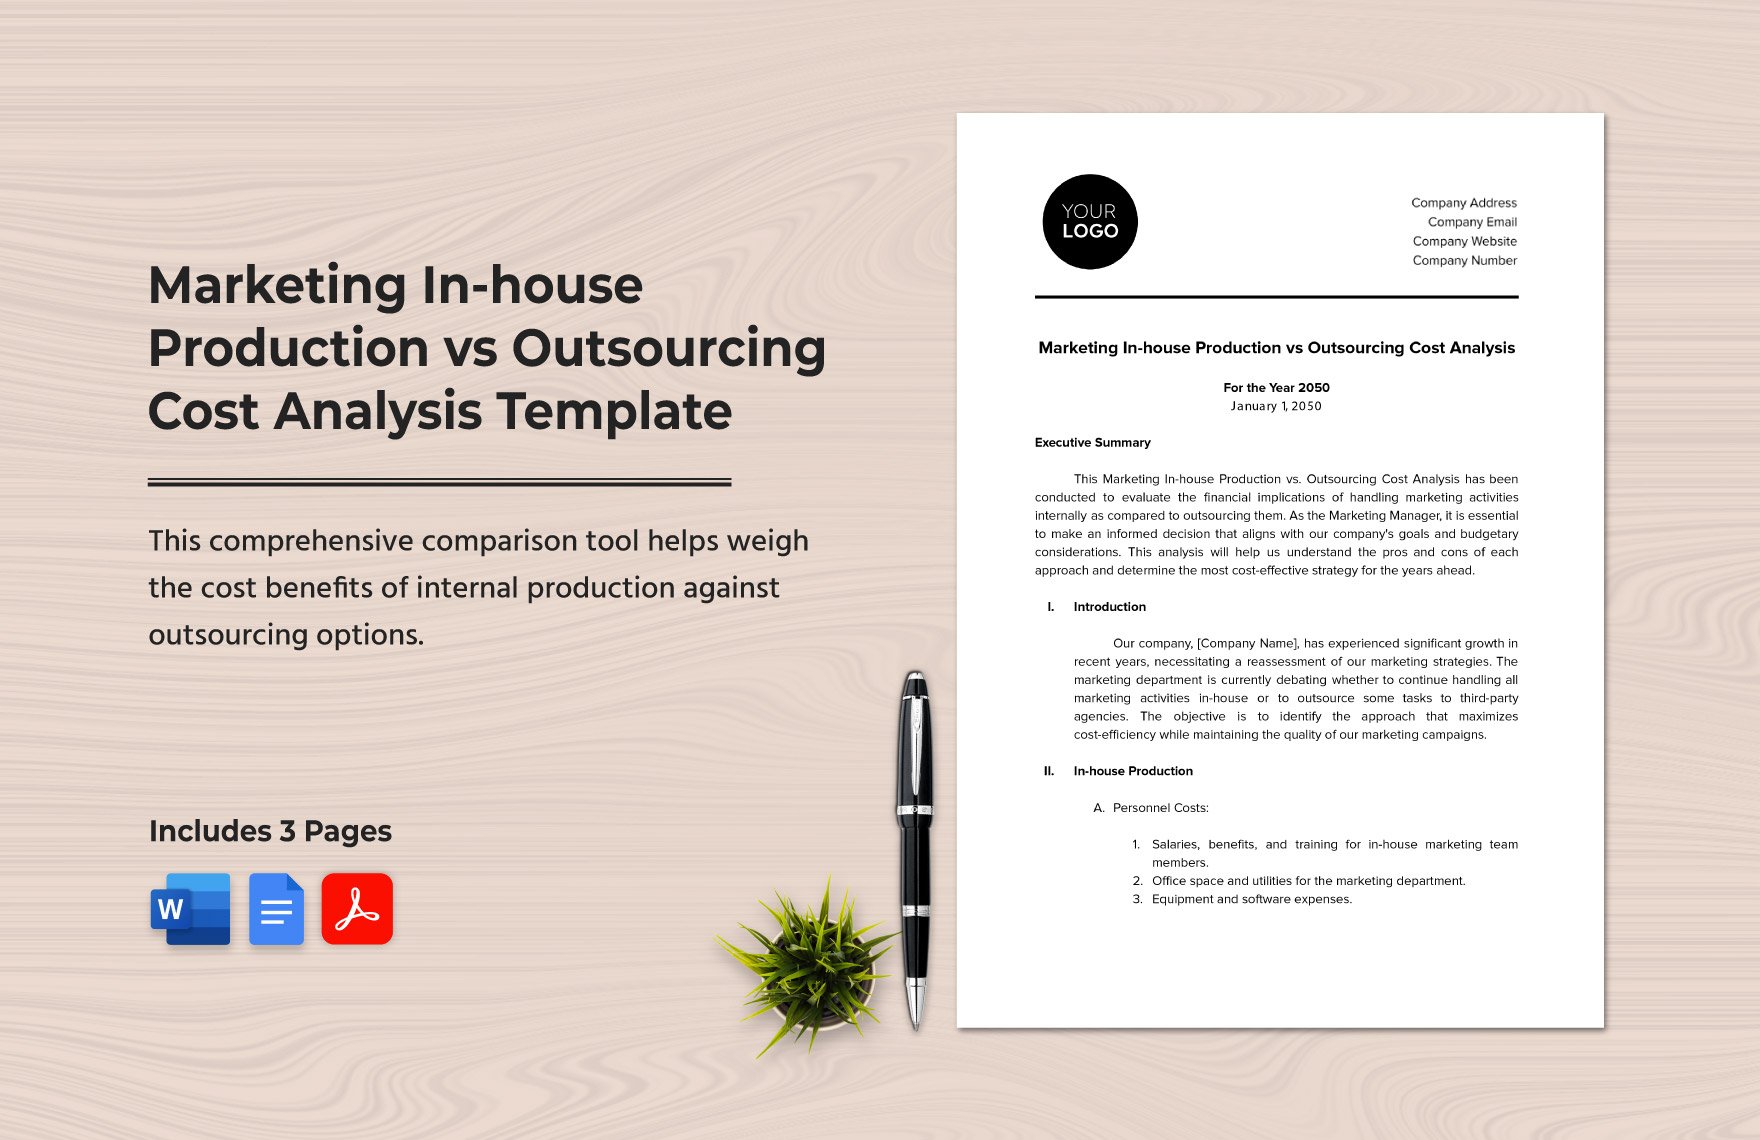 Marketing In-house Production vs Outsourcing Cost Analysis Template